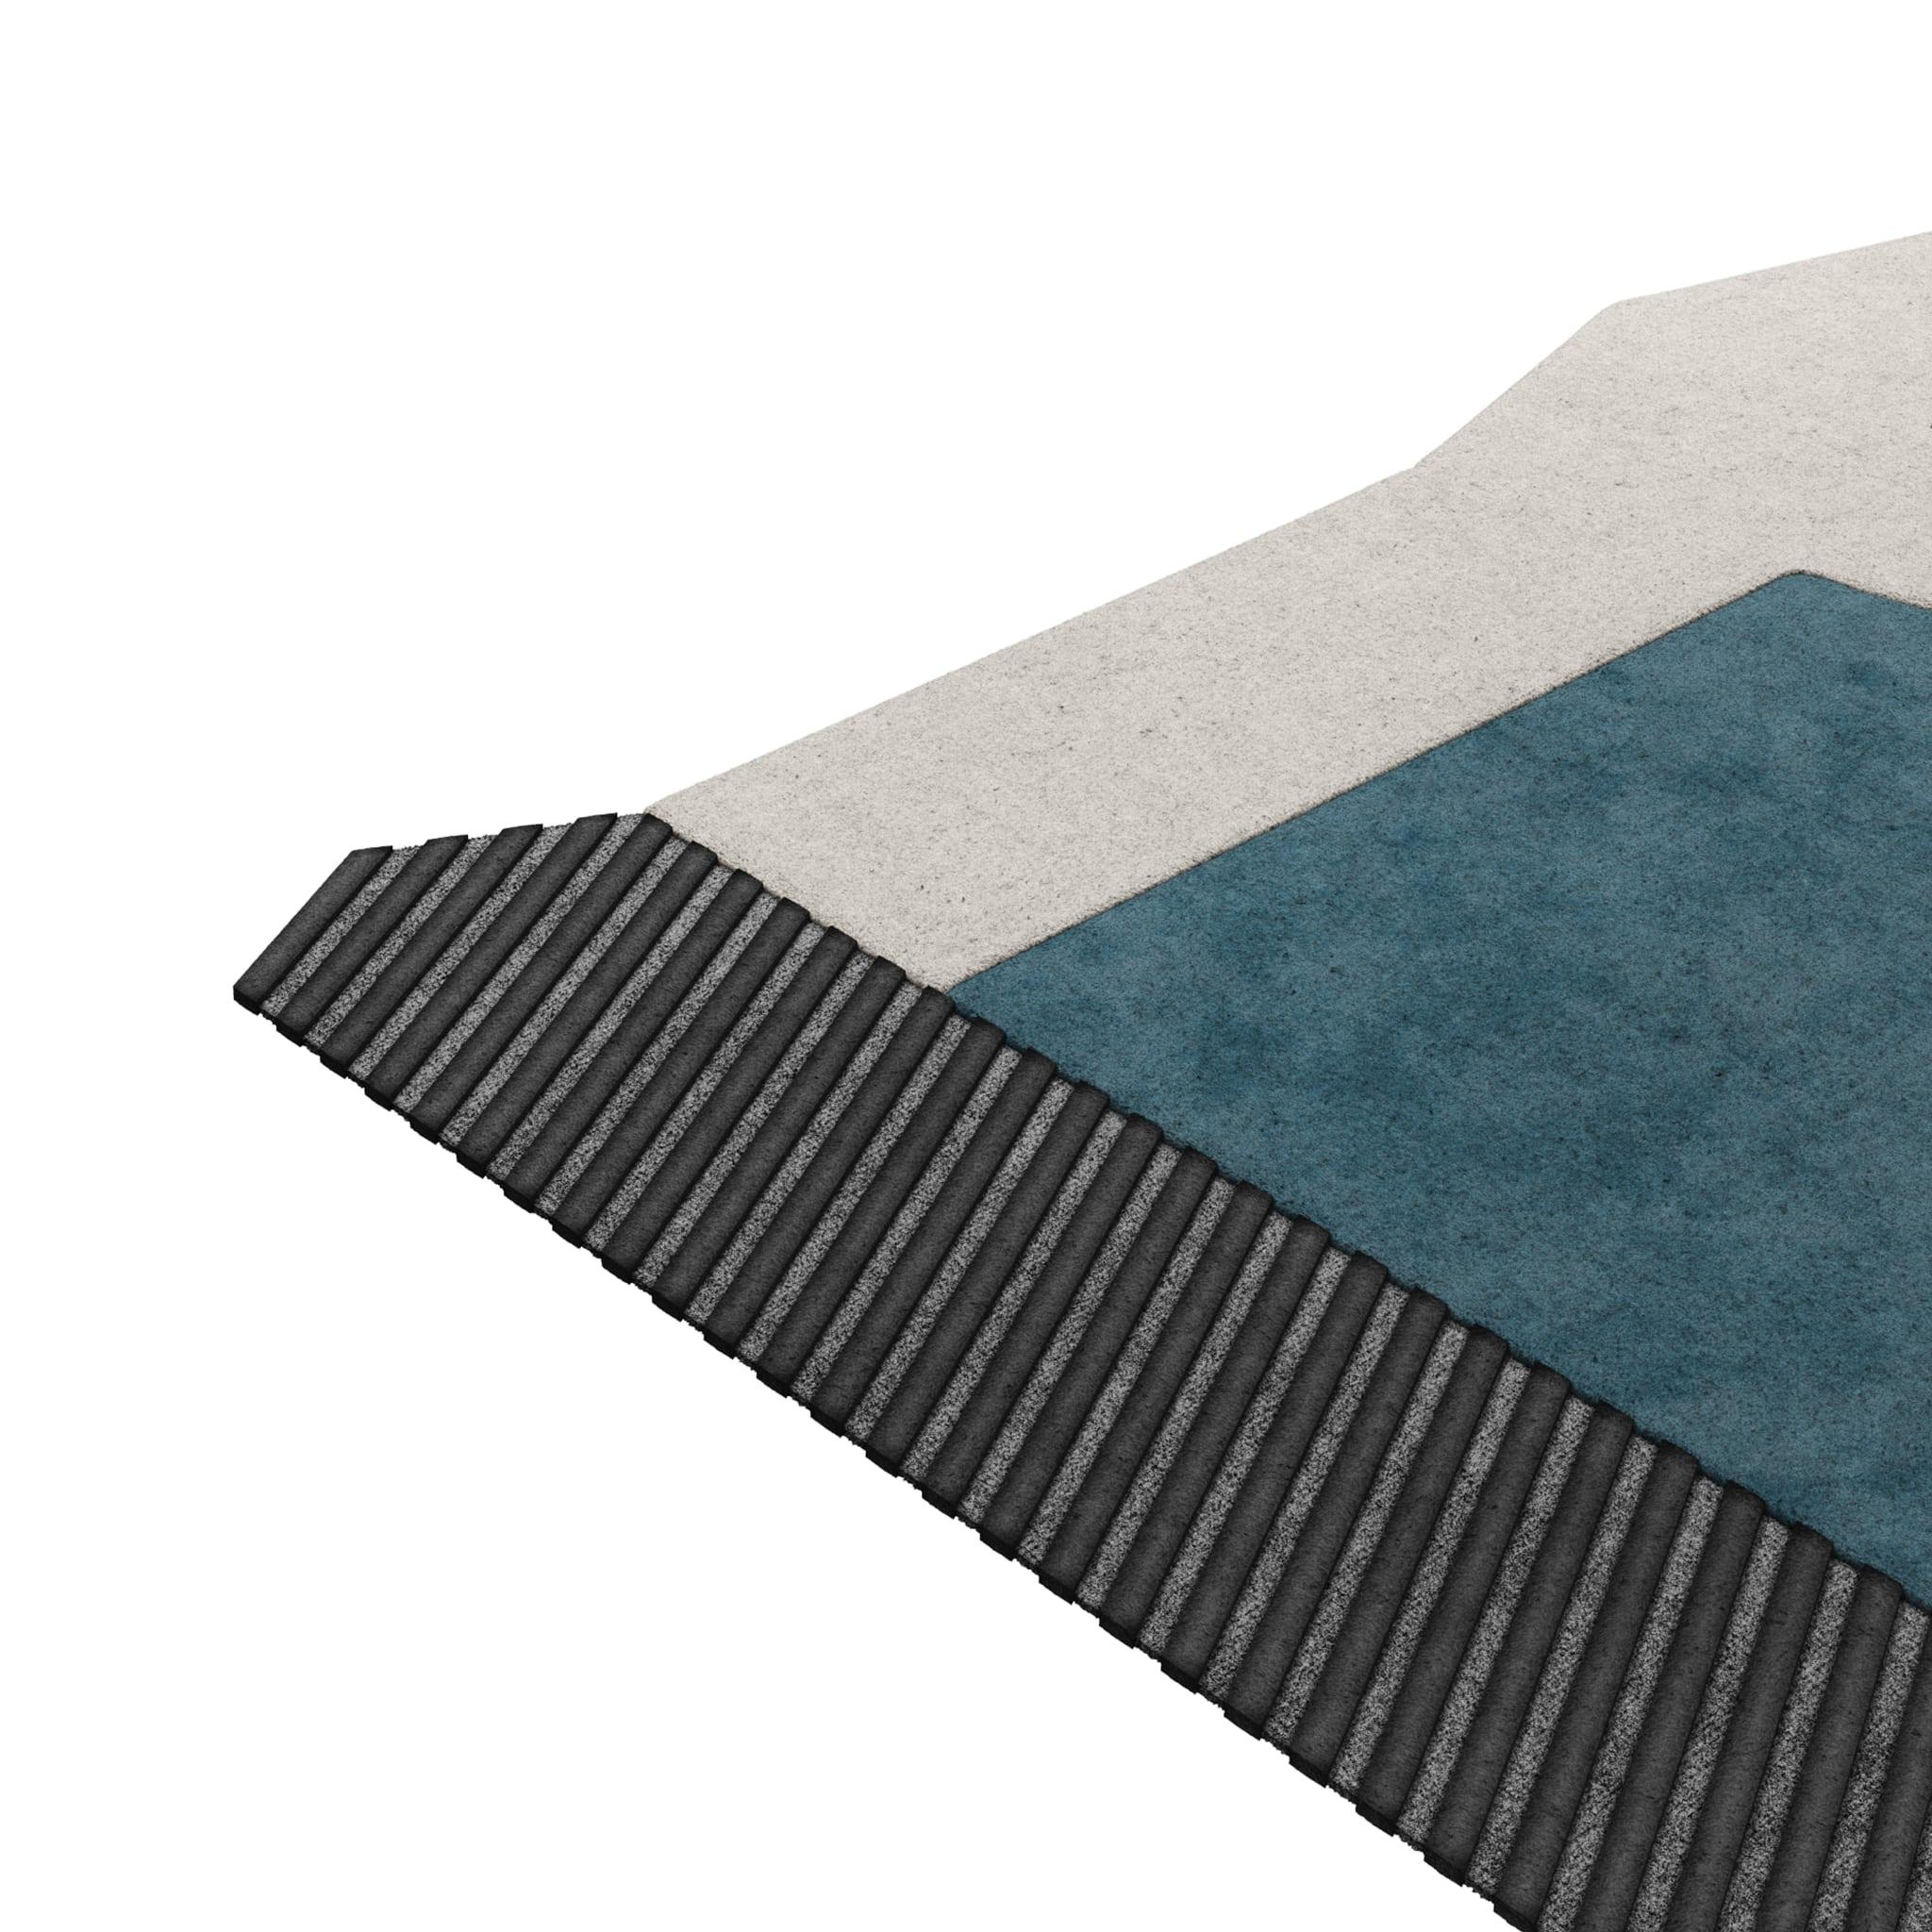 Tapis Retro #002 is a retro rug with an irregular shape and timeless colors. Inspired by architectural lines, this geometric rug makes a statement in any living space. 

Using a 3D-tufted technique that combines cut and loop pile, the retro rug in